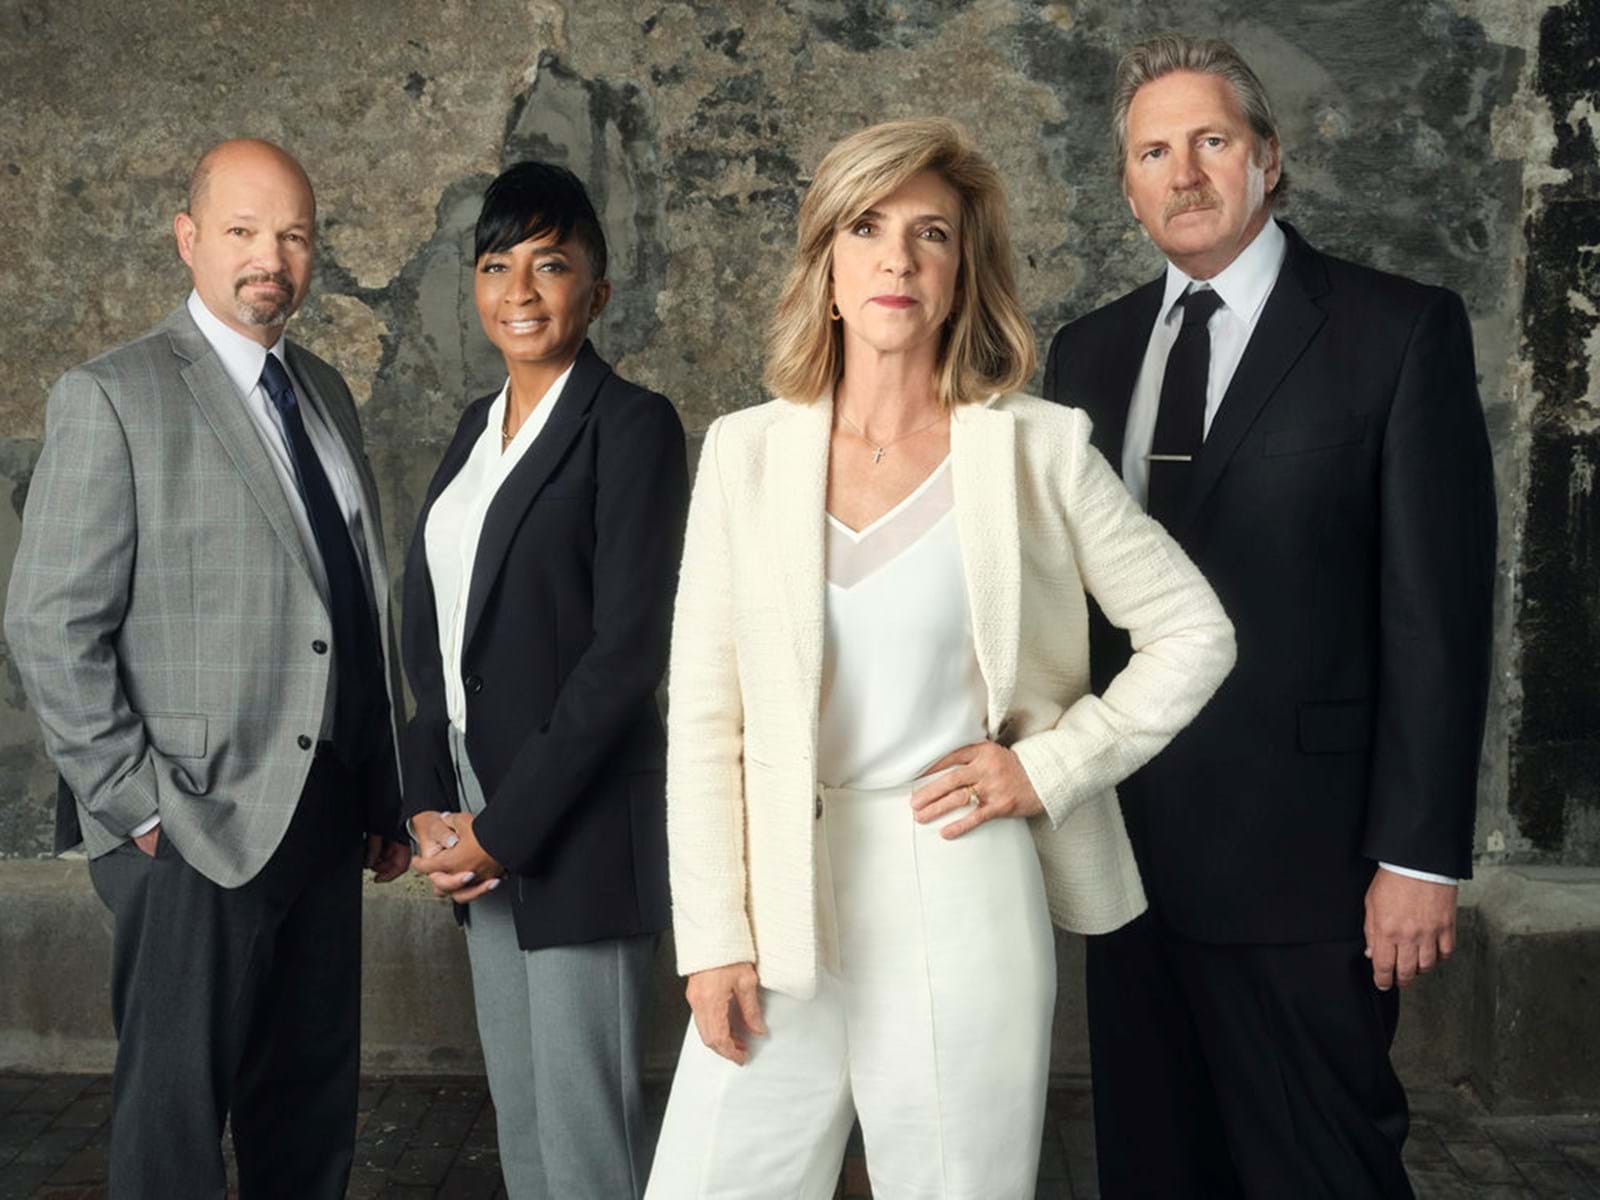 Magical Elves' true-crime series Cold Justice returns to Oxygen next month